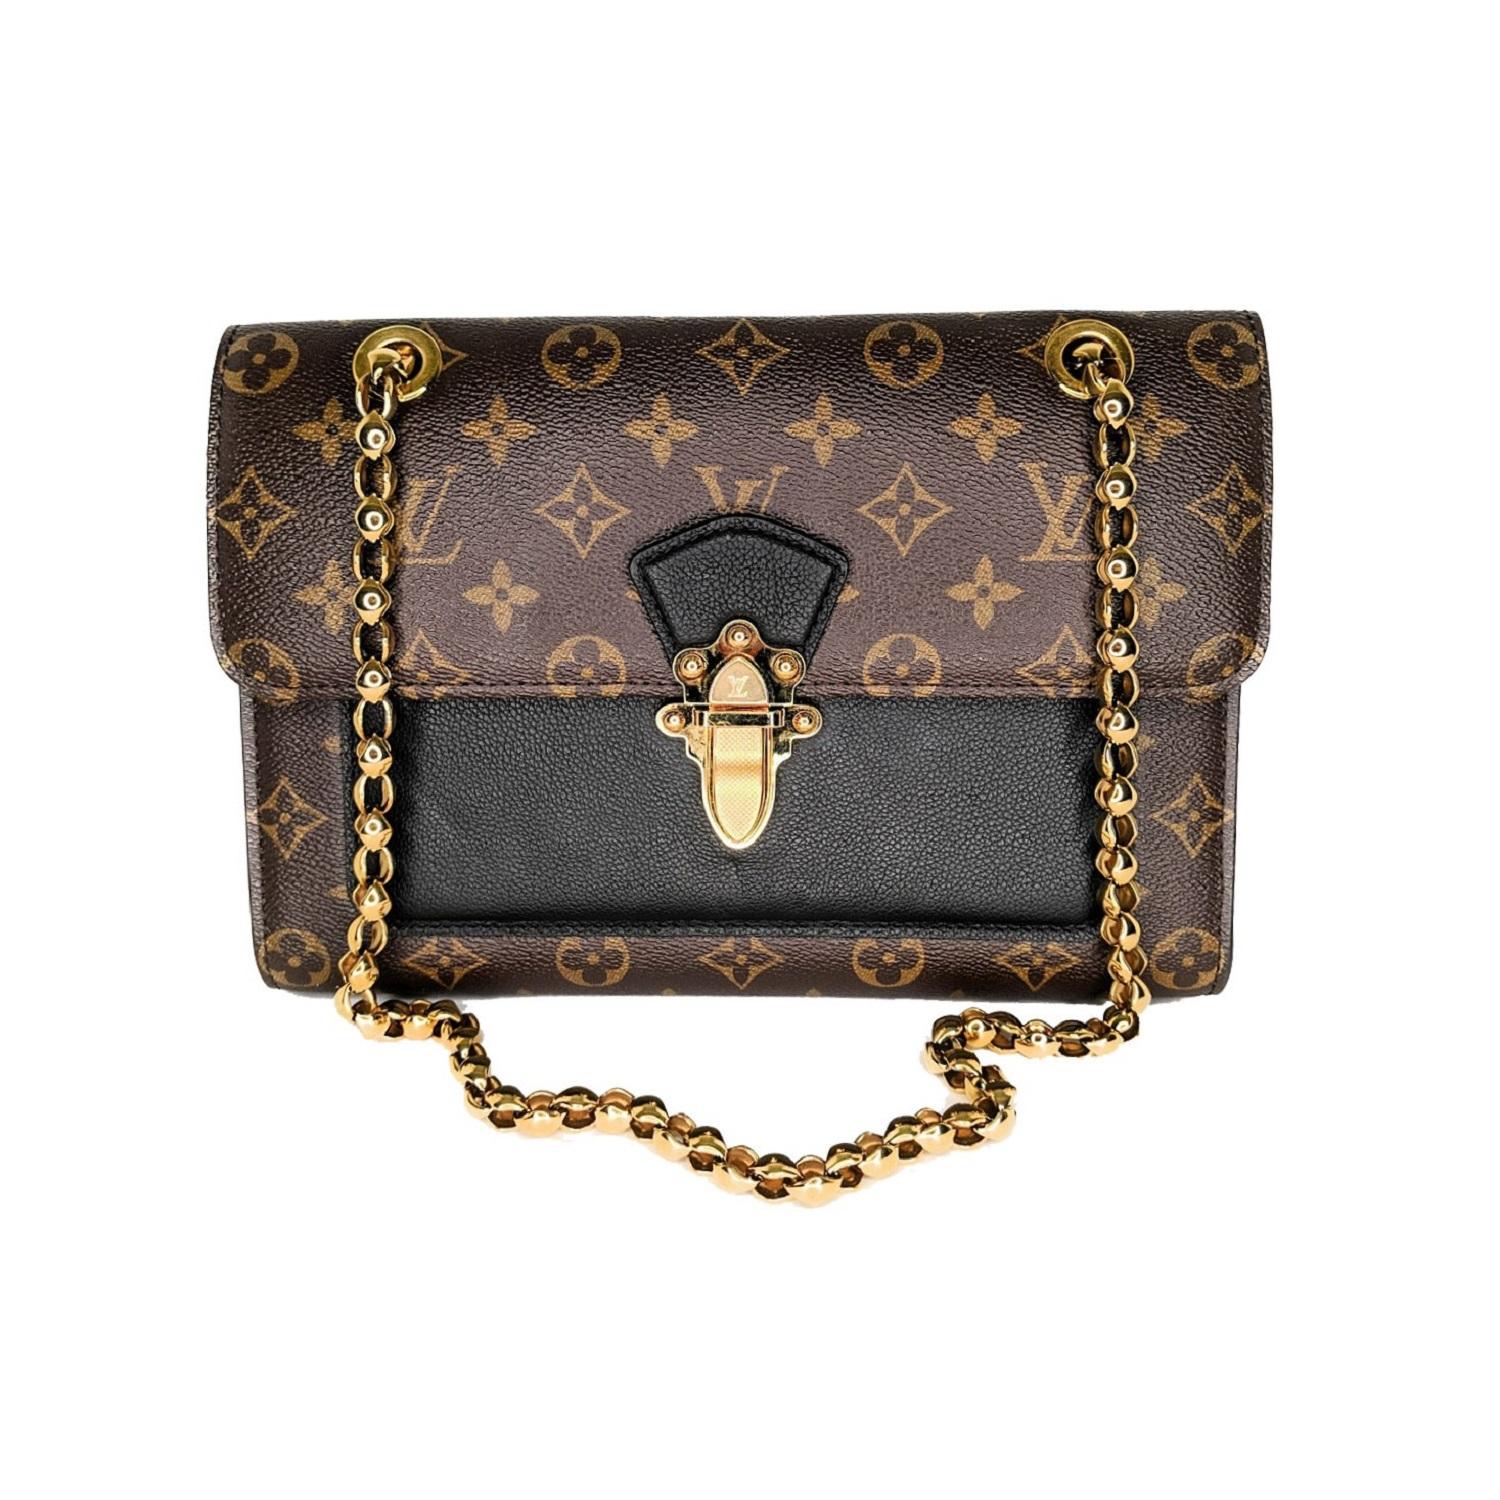 This chic shoulder bag is crafted of Louis Vuitton monogram on toile canvas with a cross-over flap. The bag features polished brass bijoux chain link shoulder straps and a facing brass press-lock for the flap. The flap opens to a front patch pocket